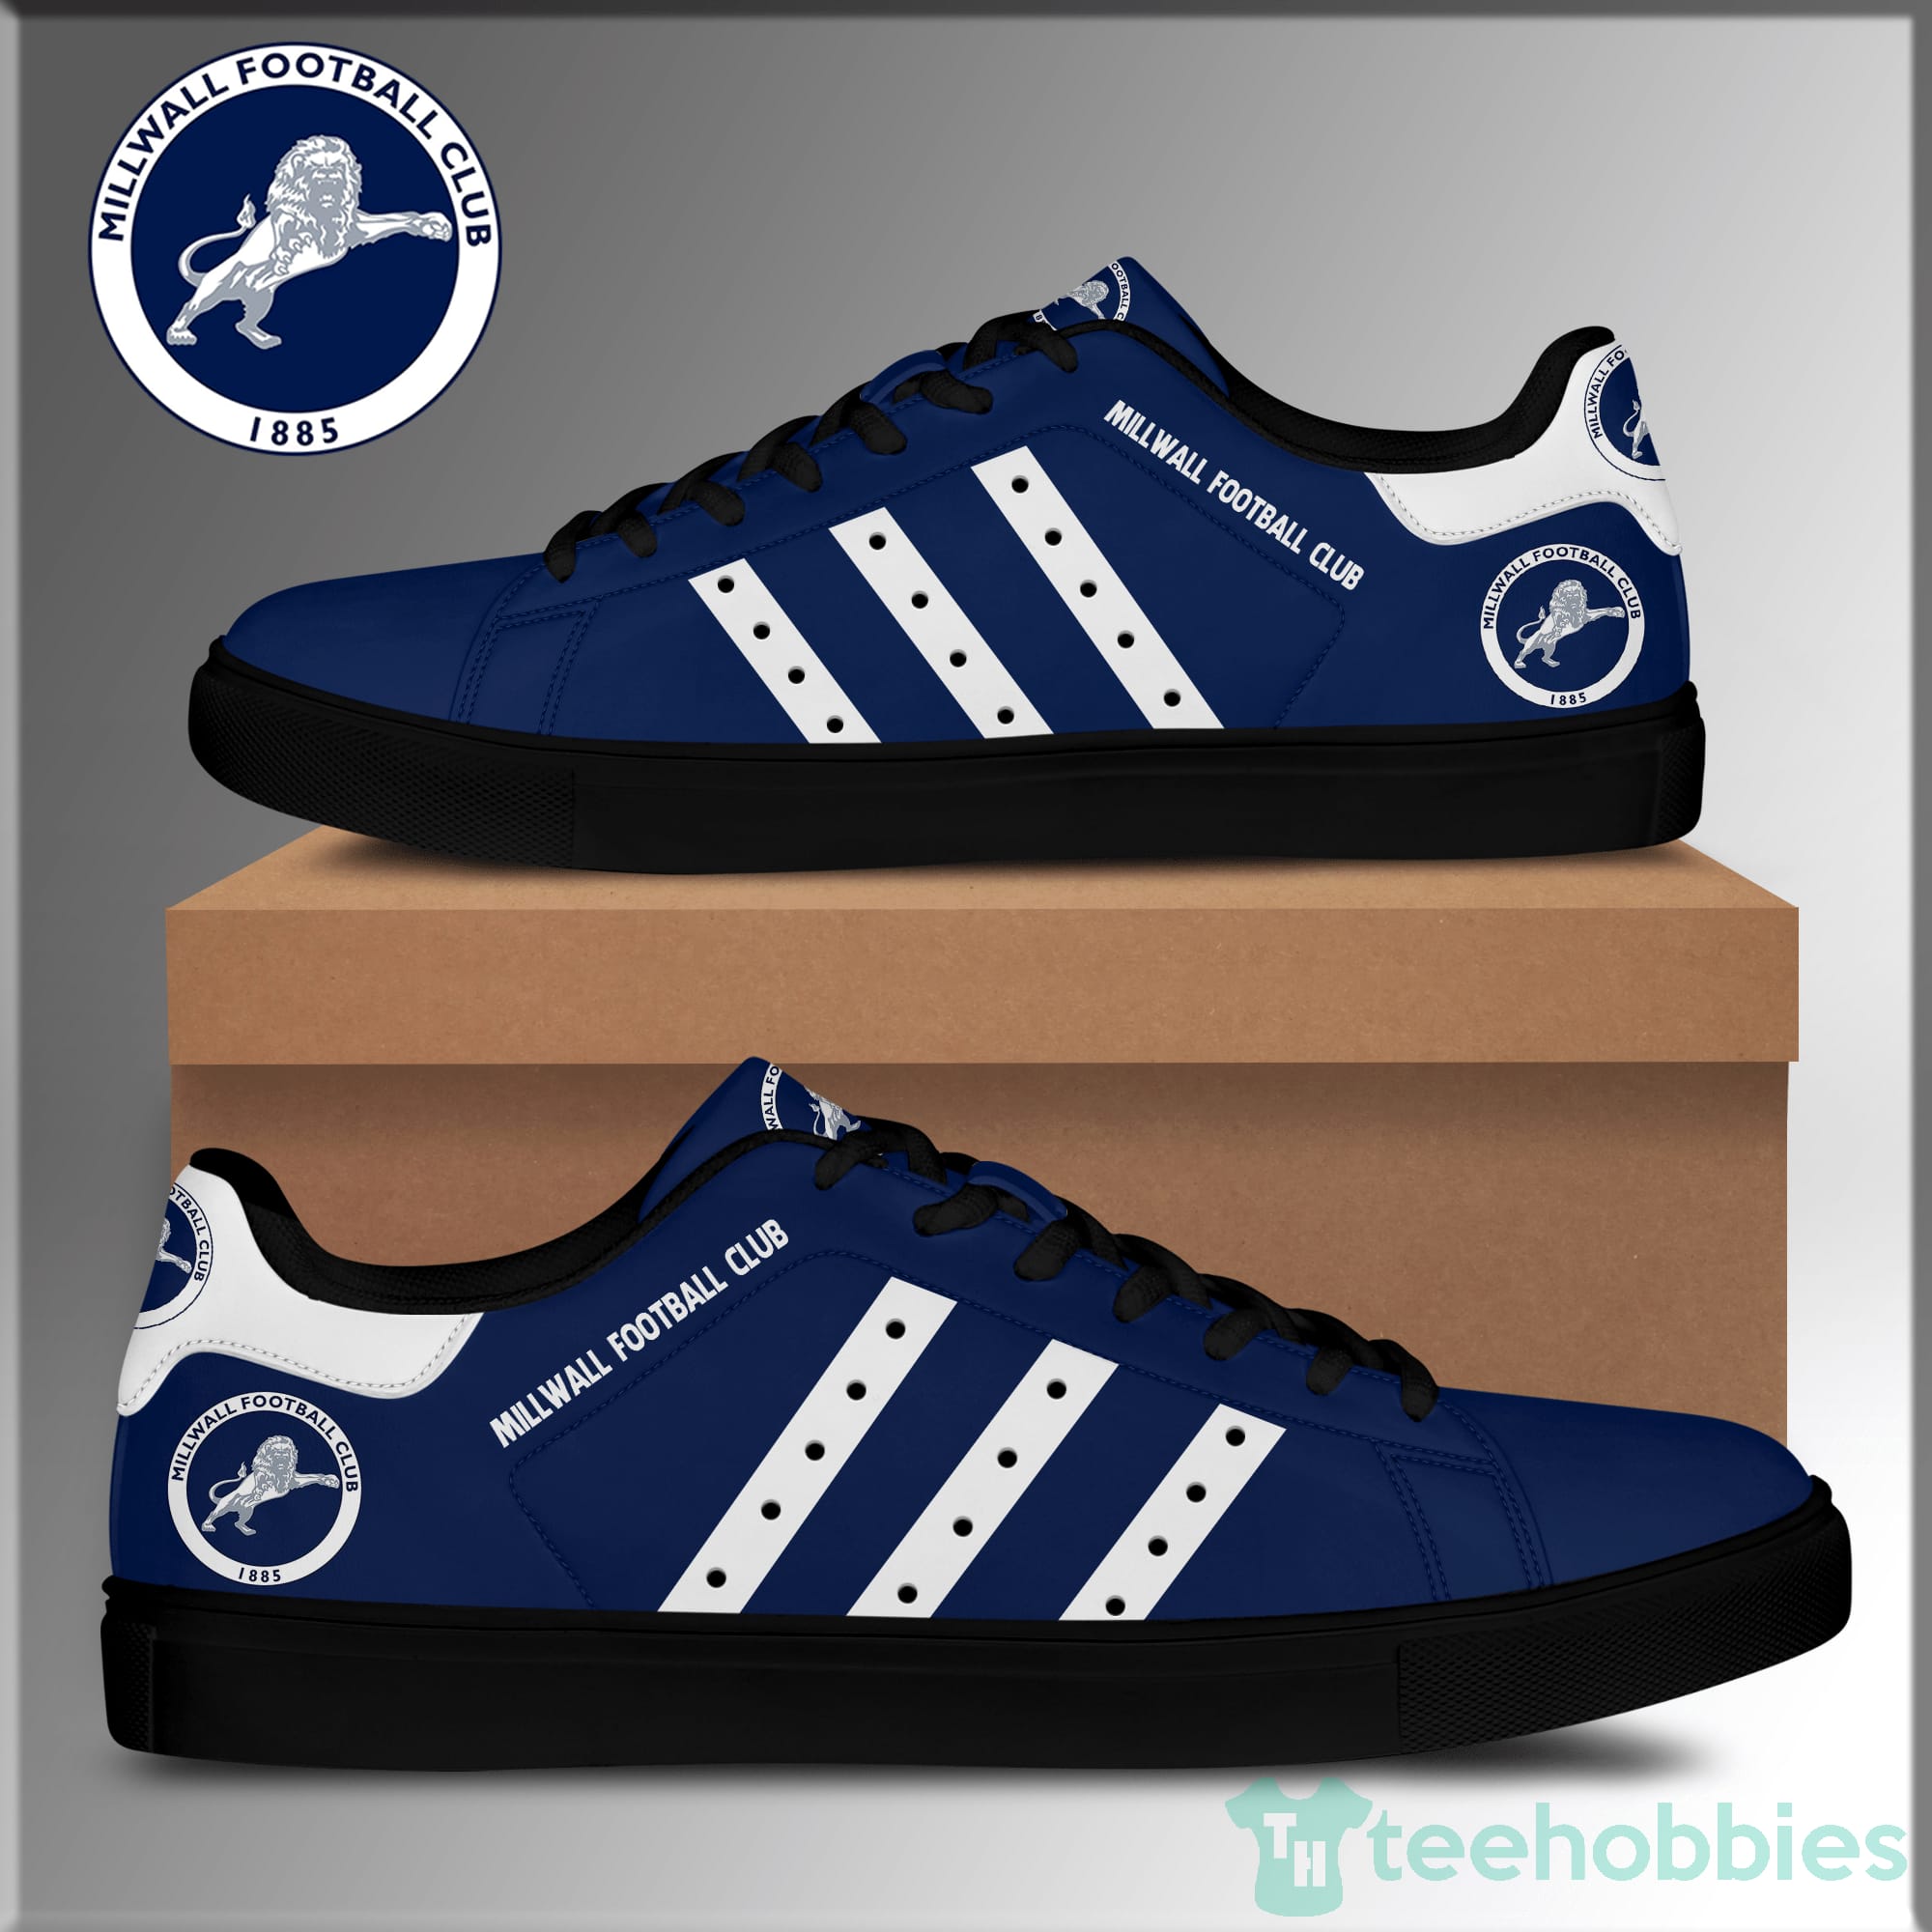 Millwall Football Club Navy Low Top Skate Shoes Product photo 2